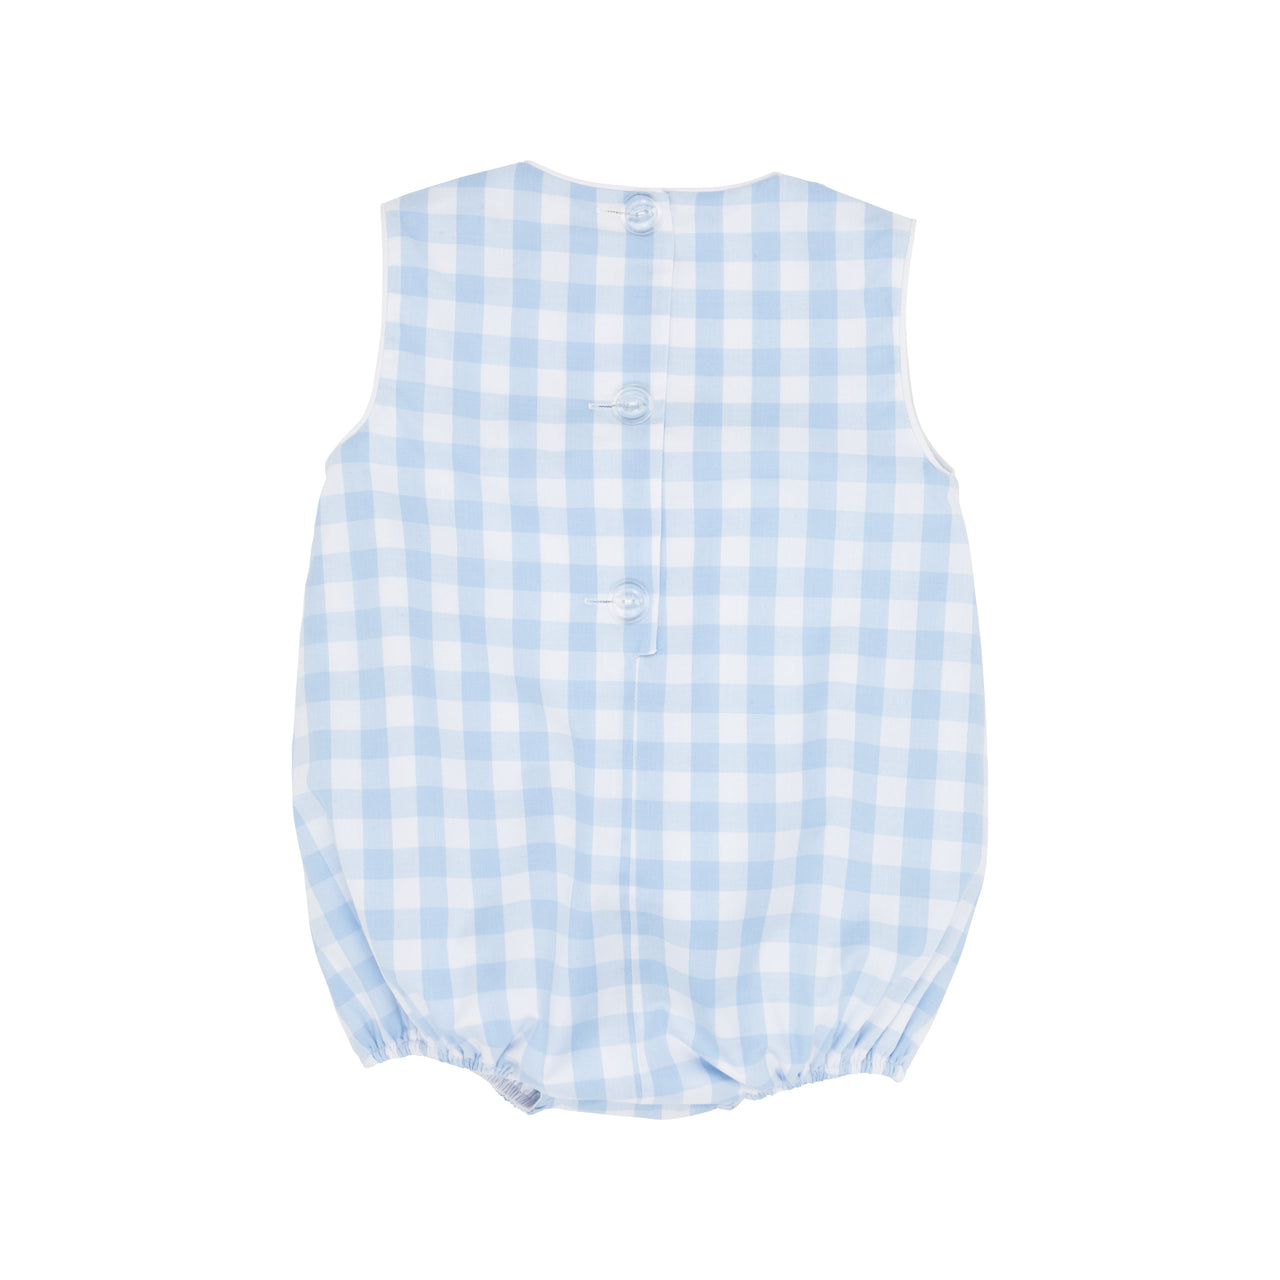 Benjamin Bubble | Beale Street Blue Check With Worth Avenue White